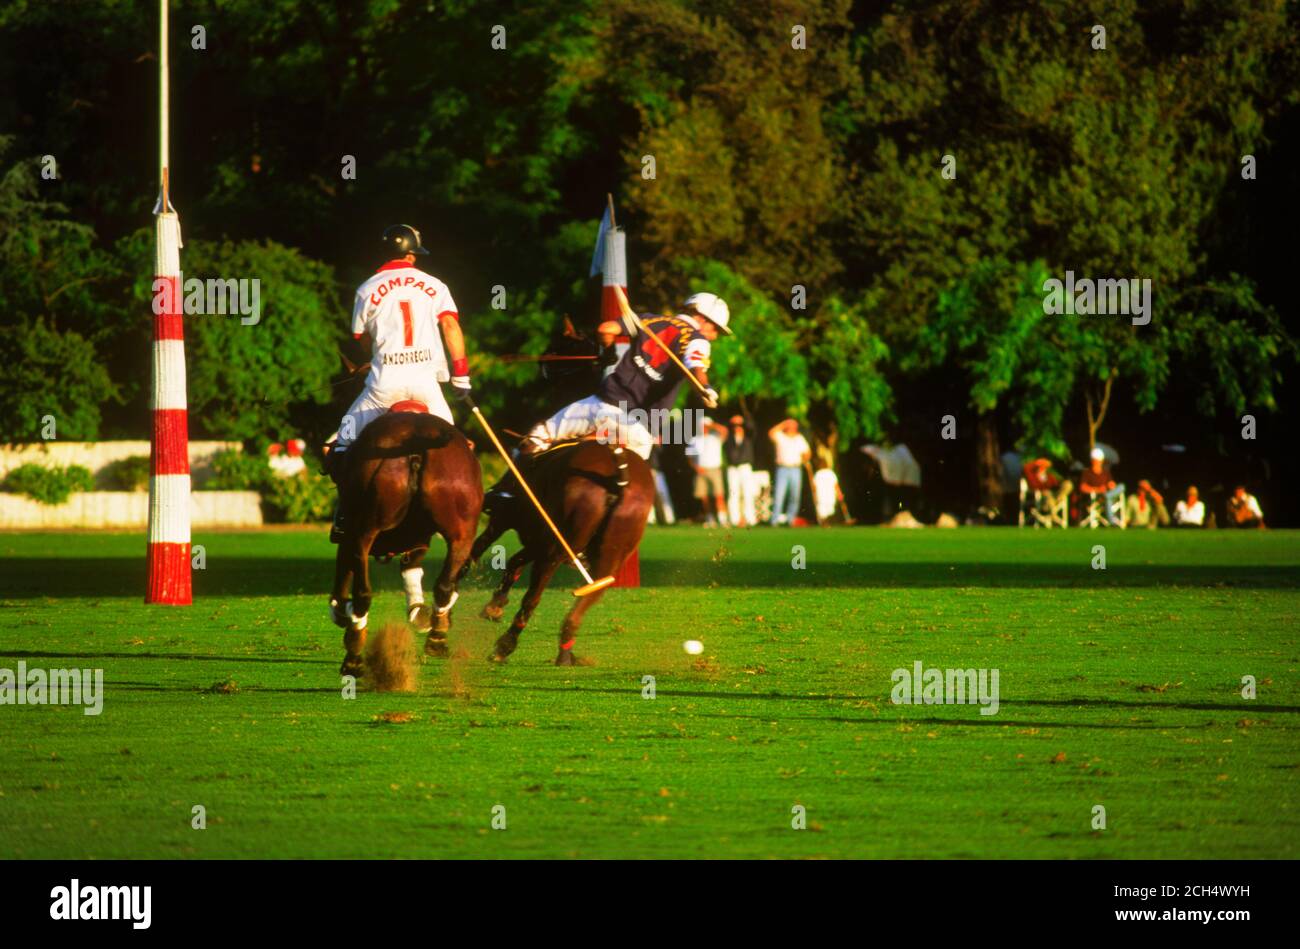 Polo players in action at Campo de Polo in Buenos Aires, Argentina Stock Photo